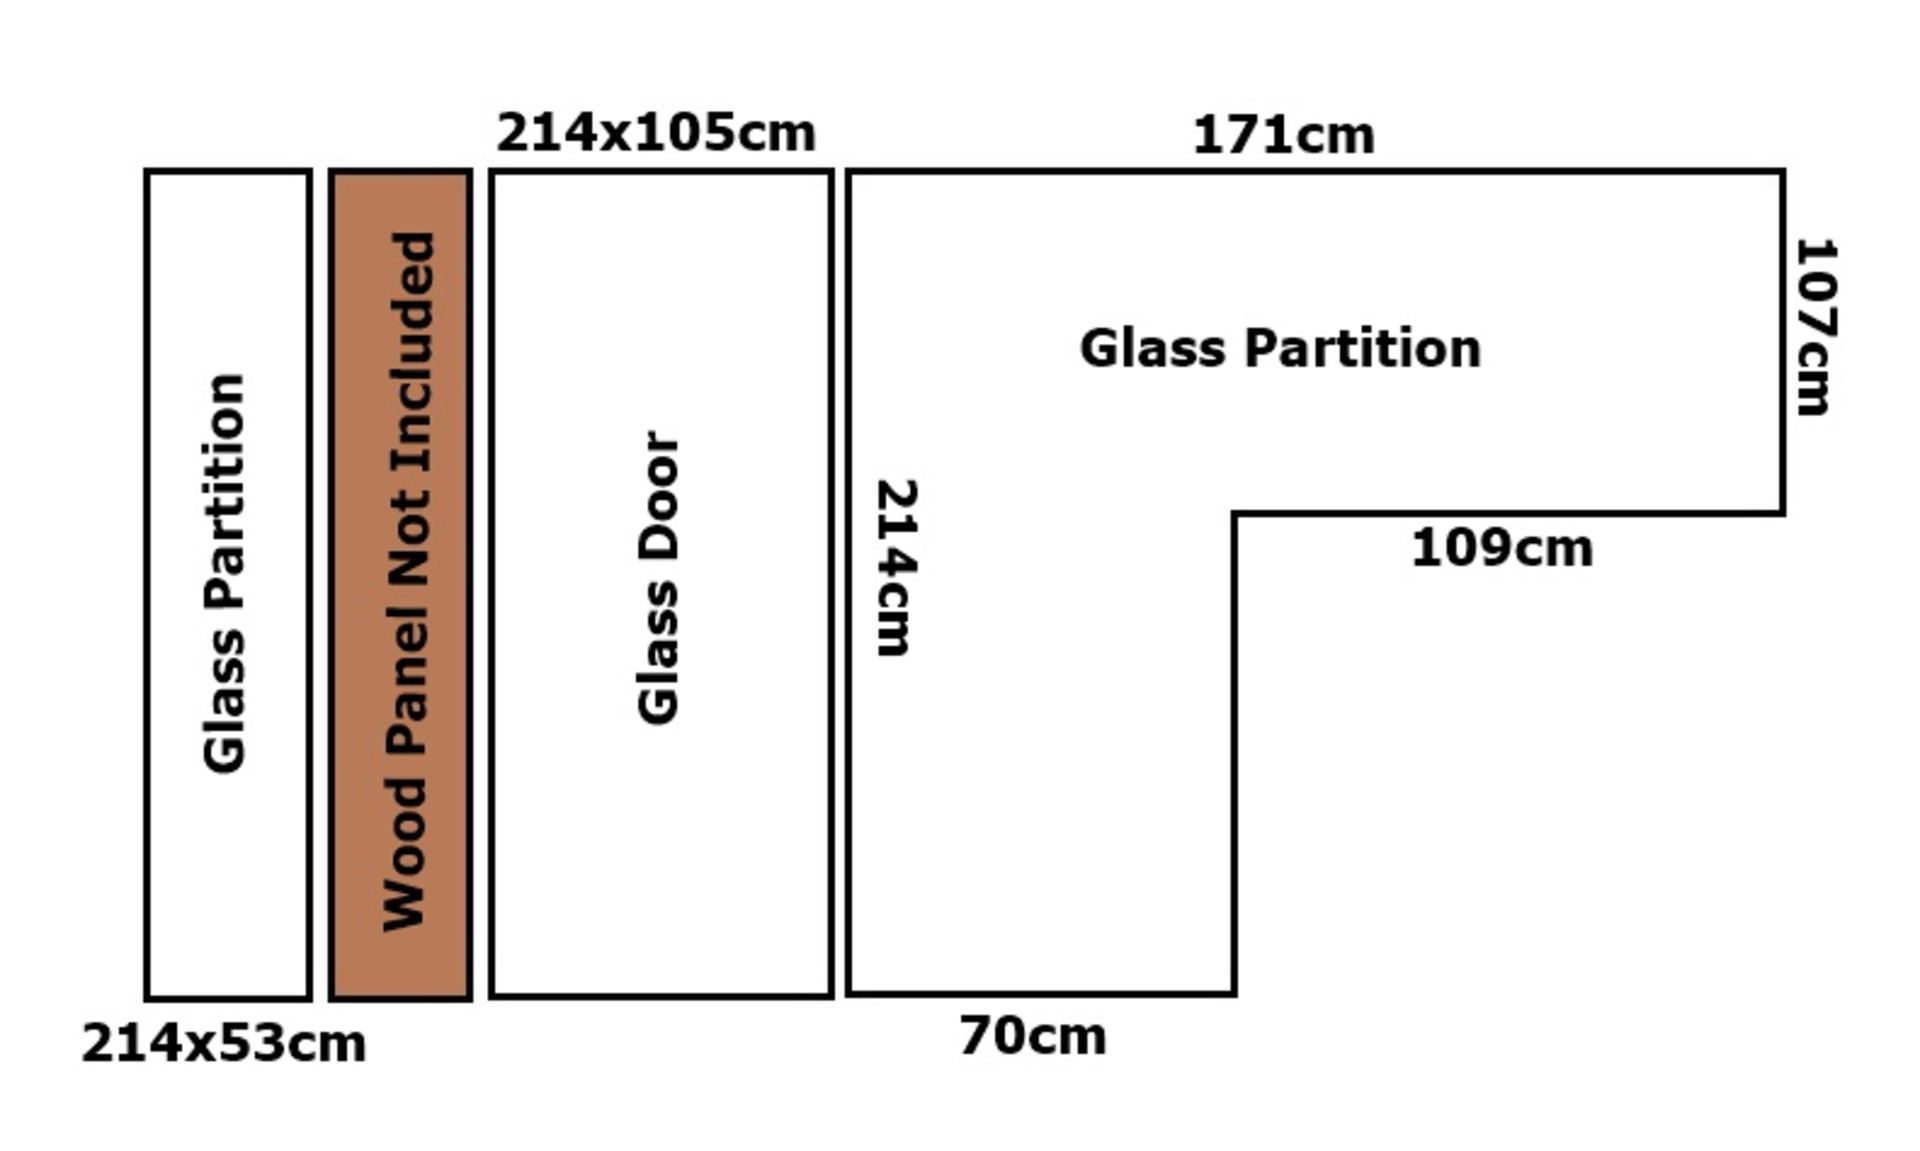 1 x Framed Glass Partition With Swinging Door - Please See Images For Dimensions - CL392 - Ref LD208 - Image 2 of 12